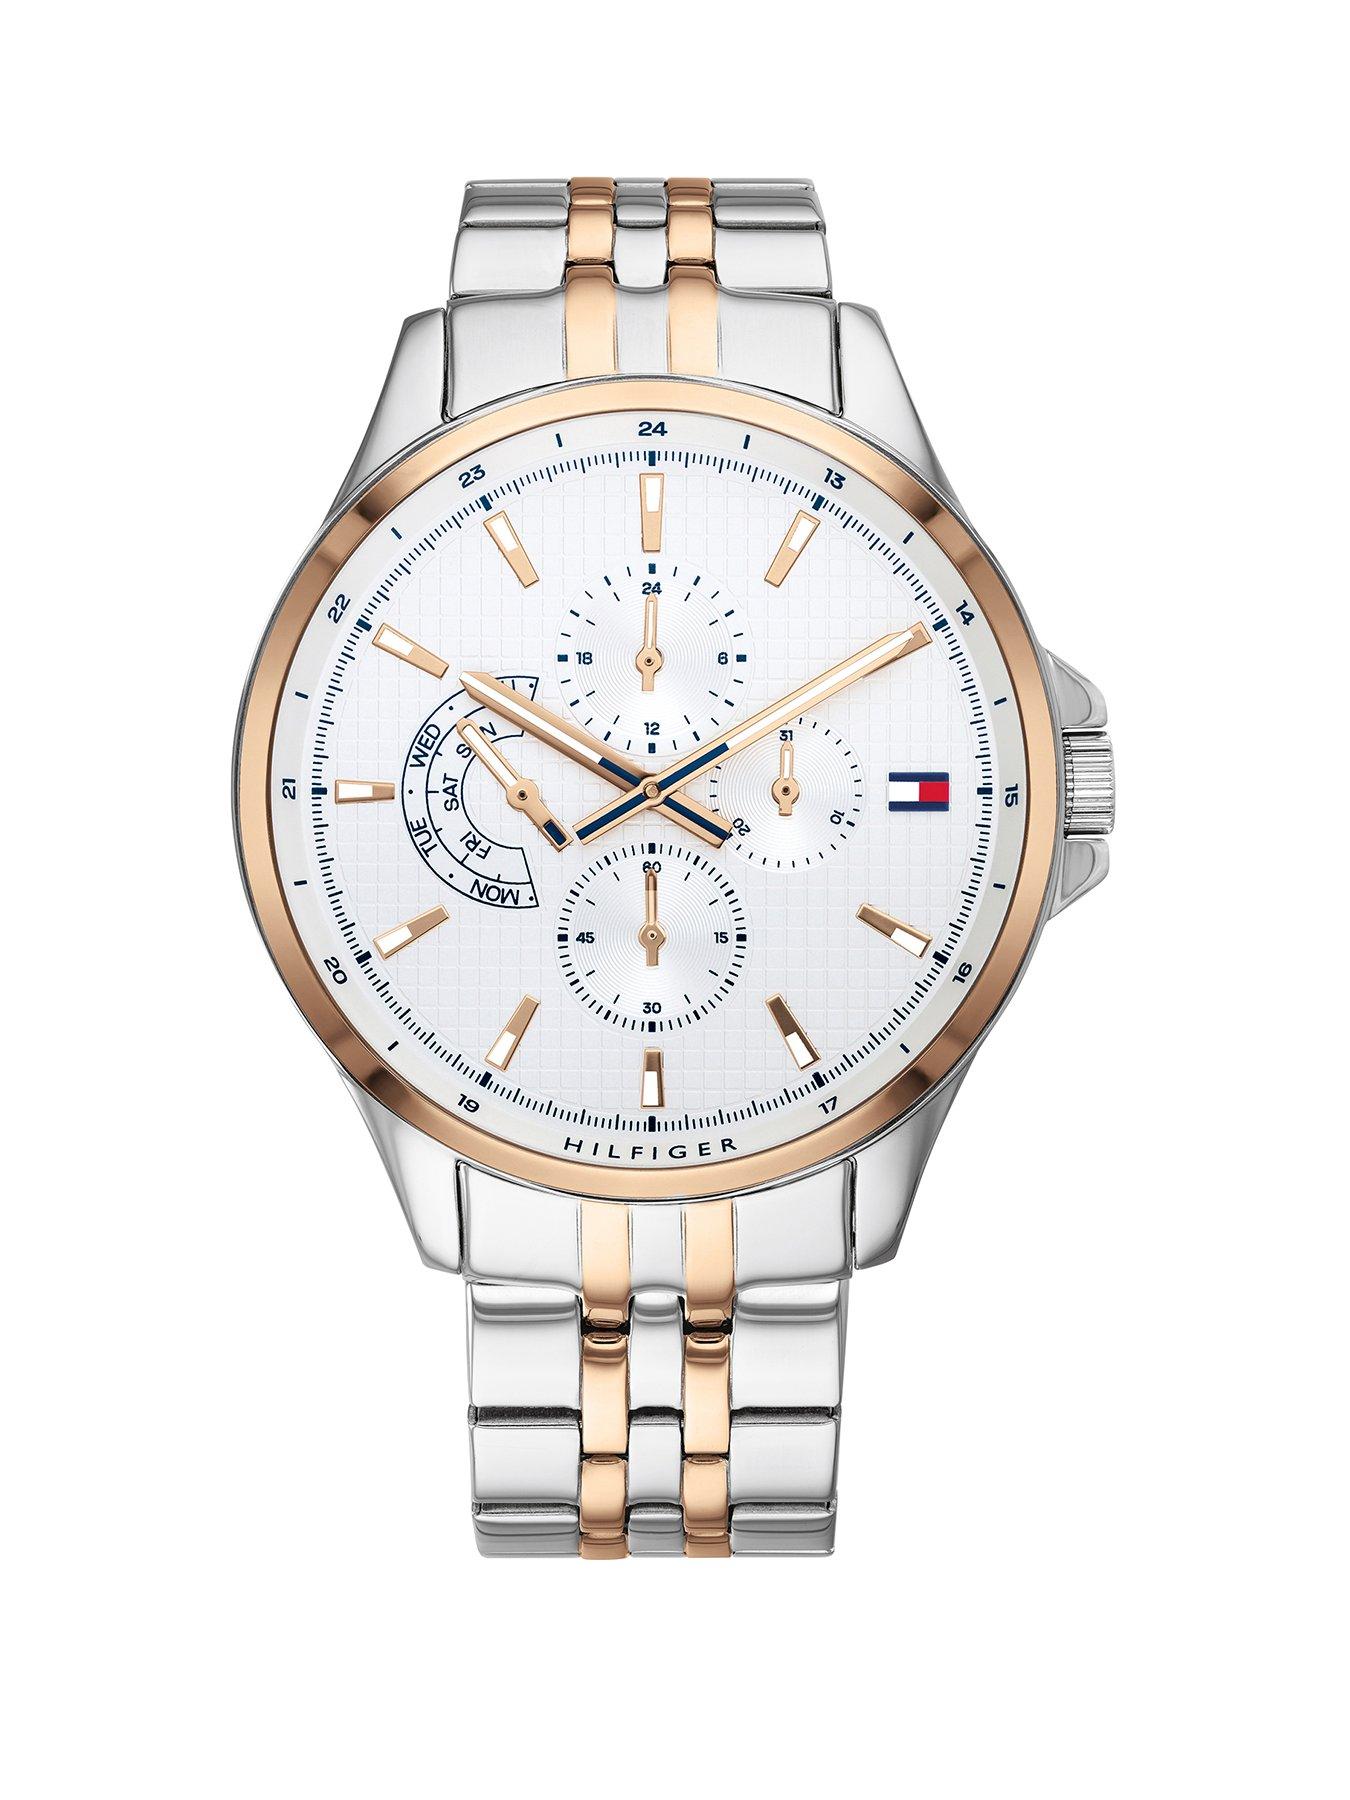 tommy hilfiger watch battery cost